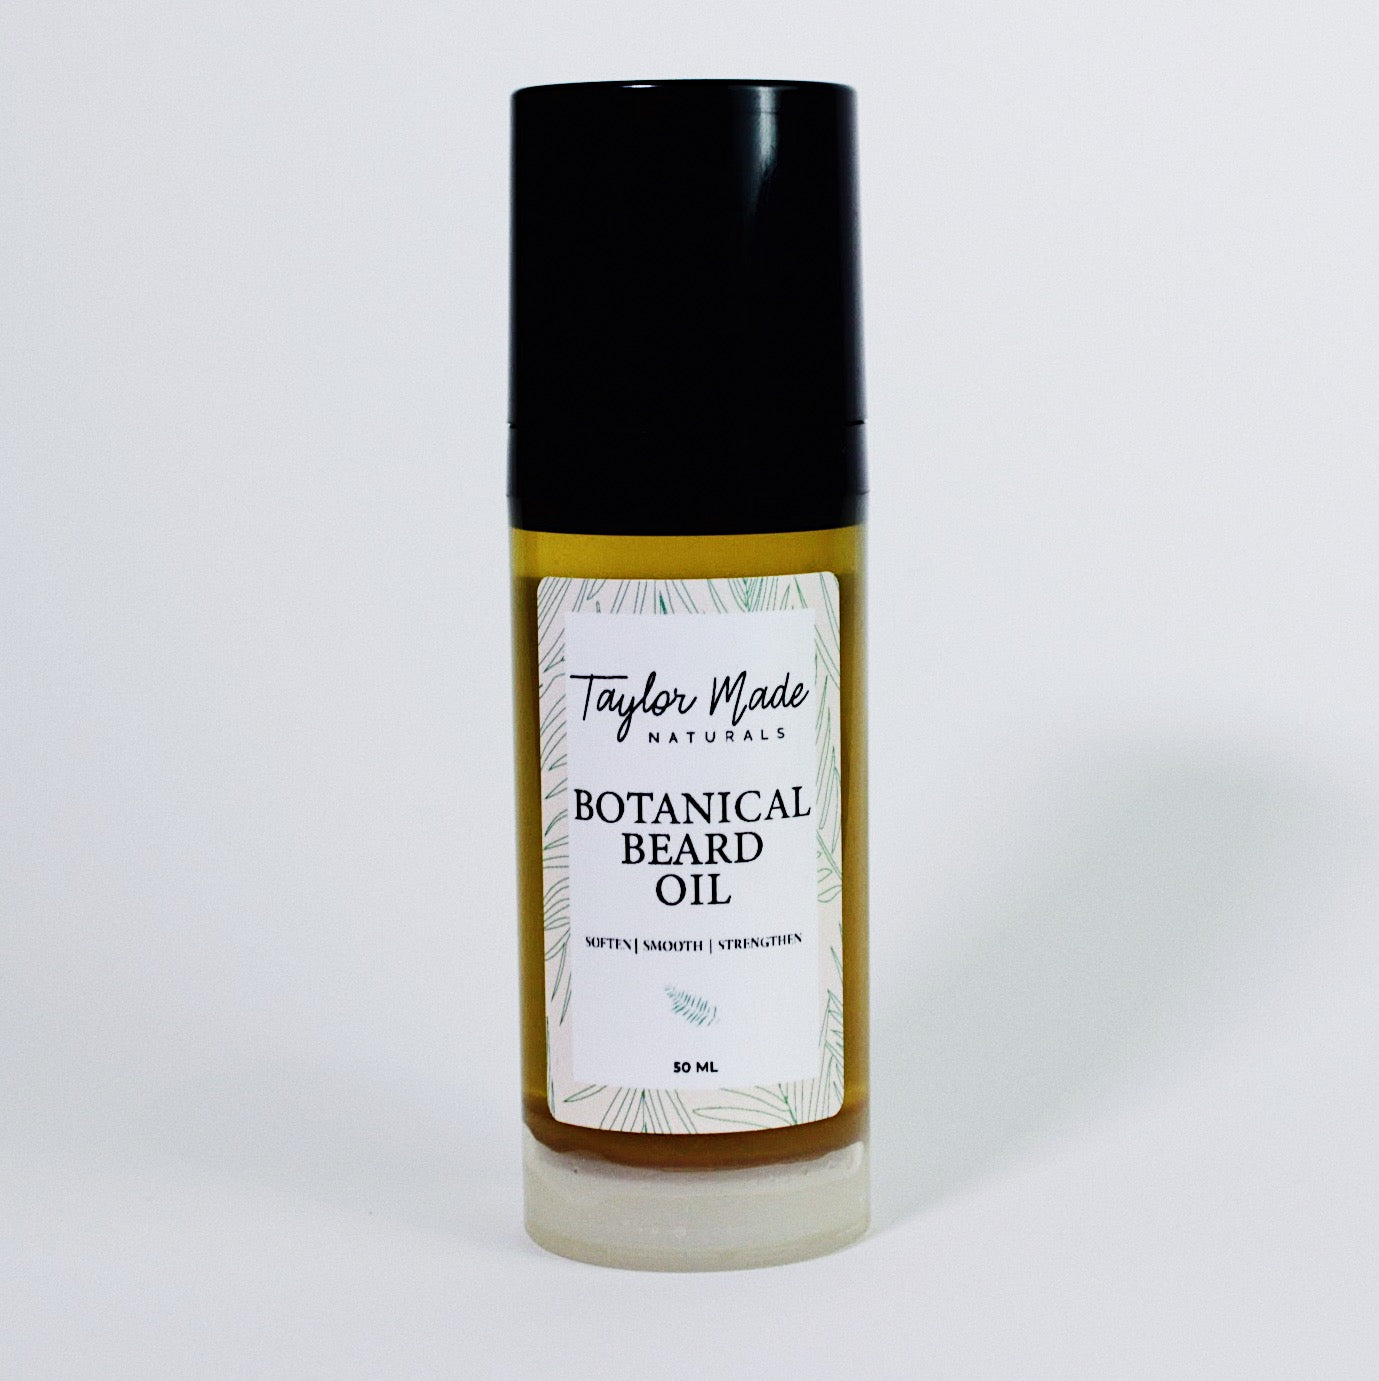 Botanical Beard Oil- Soften, Smooth and Strengthen your hair with our Natural Botanical Beard oil.